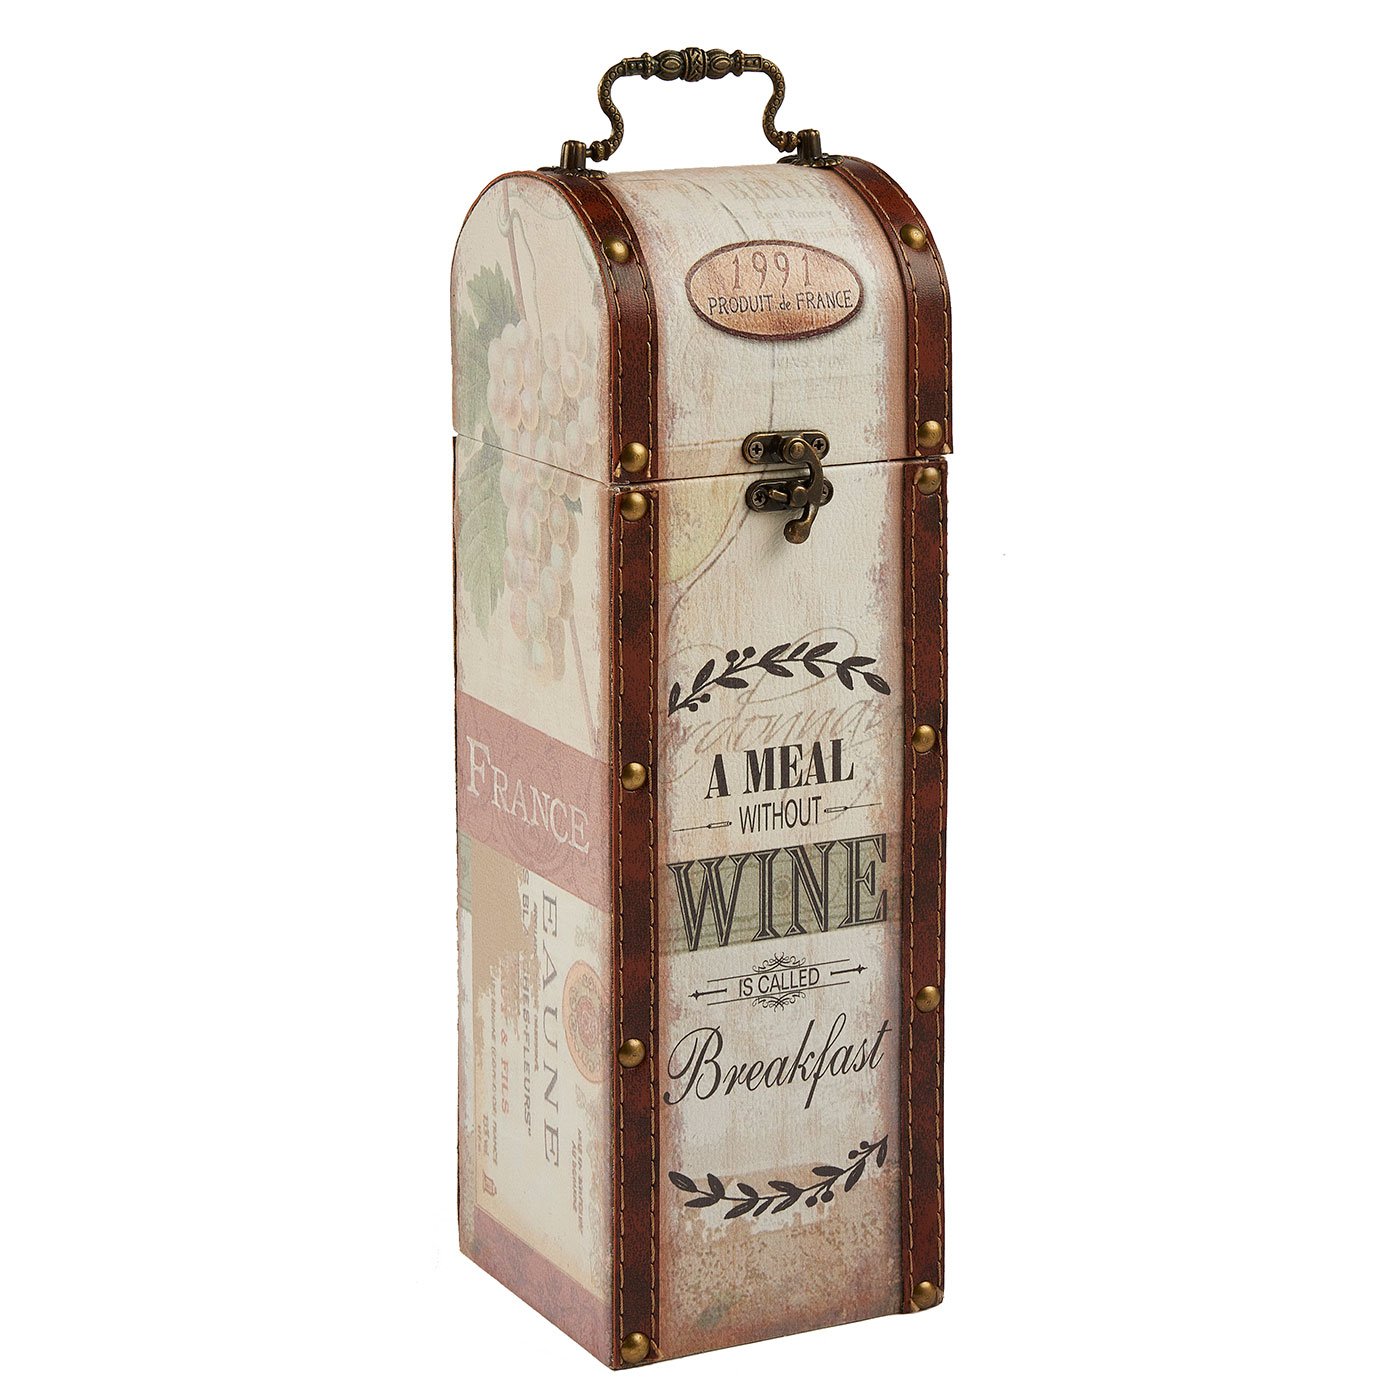 Find Wooden Wine Boxes For Sale Custom Wine Boxes Wholesale